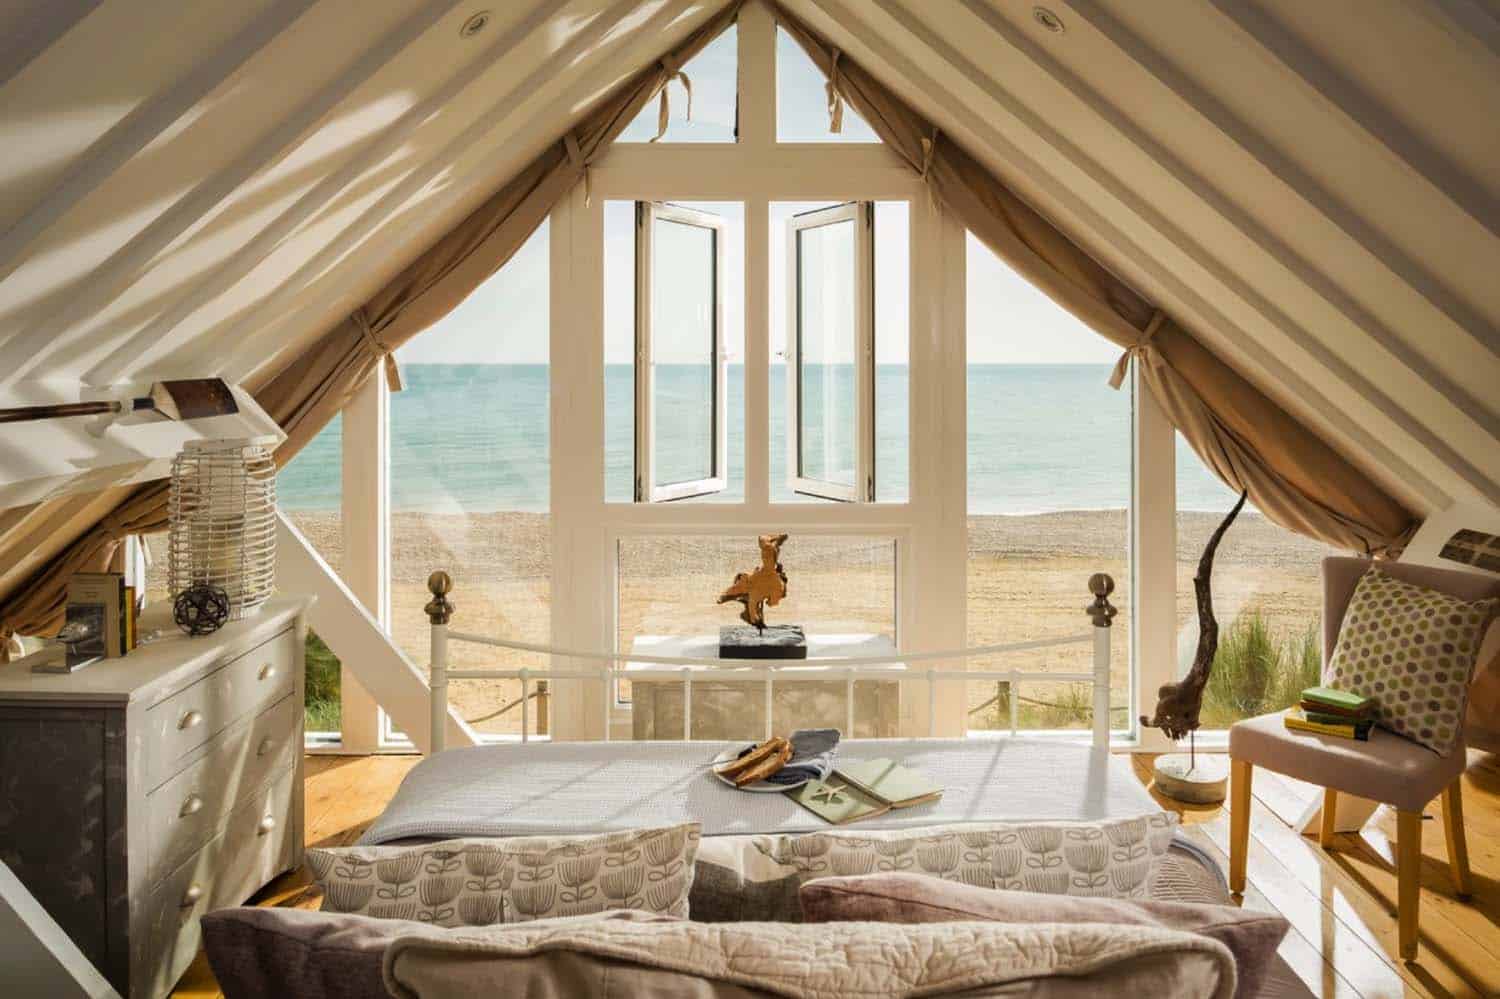 A perfect seaside holiday in East Sussex: Barefoot Beach House